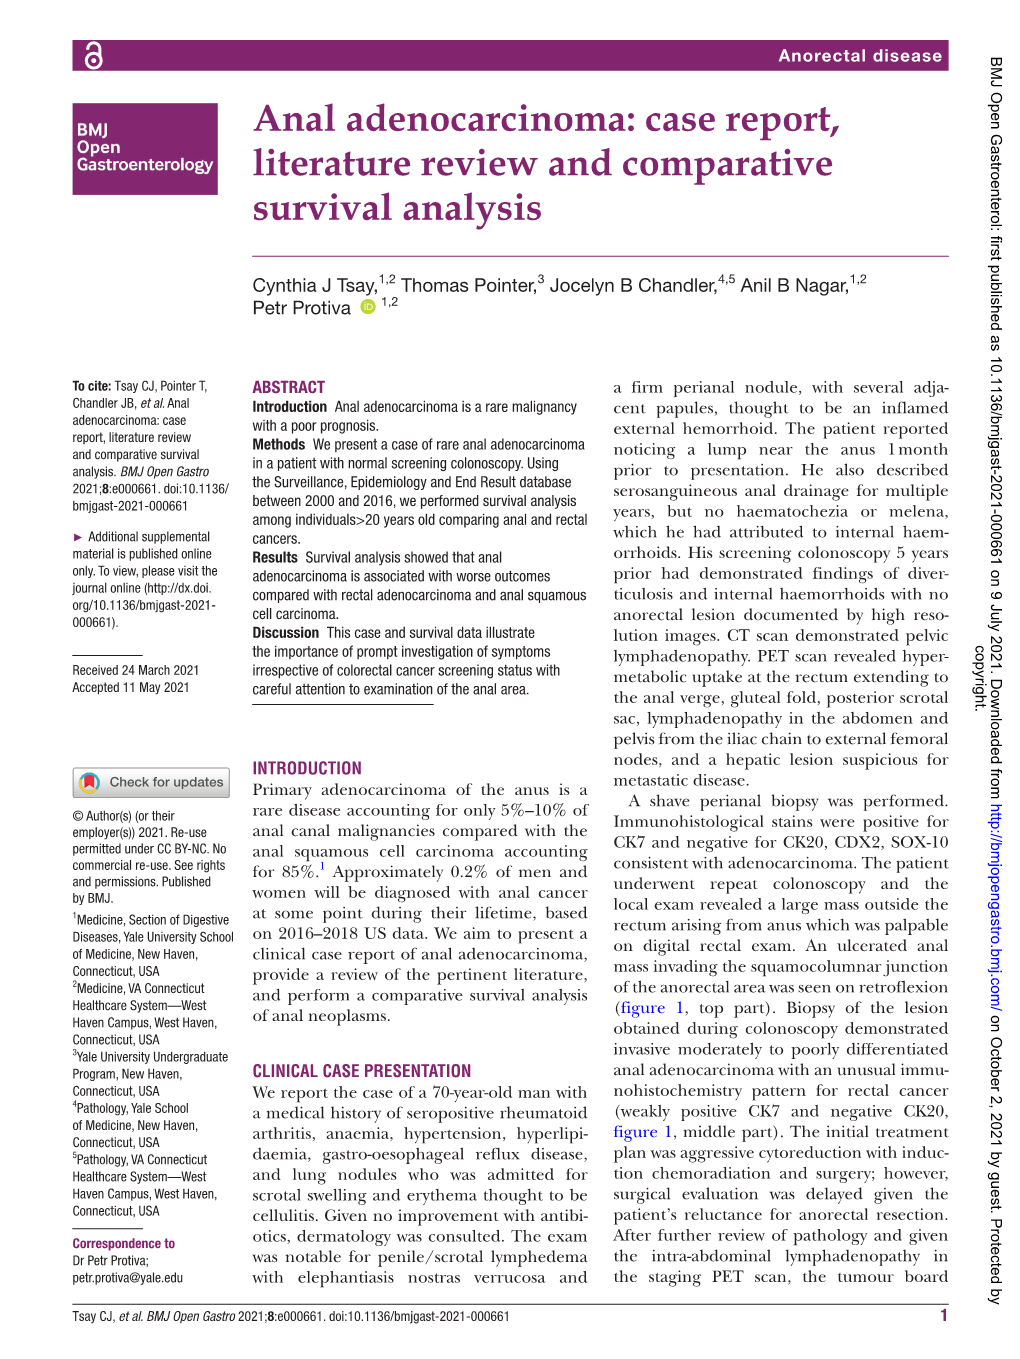 Anal Adenocarcinoma: Case Report, Literature Review and Comparative Survival Analysis